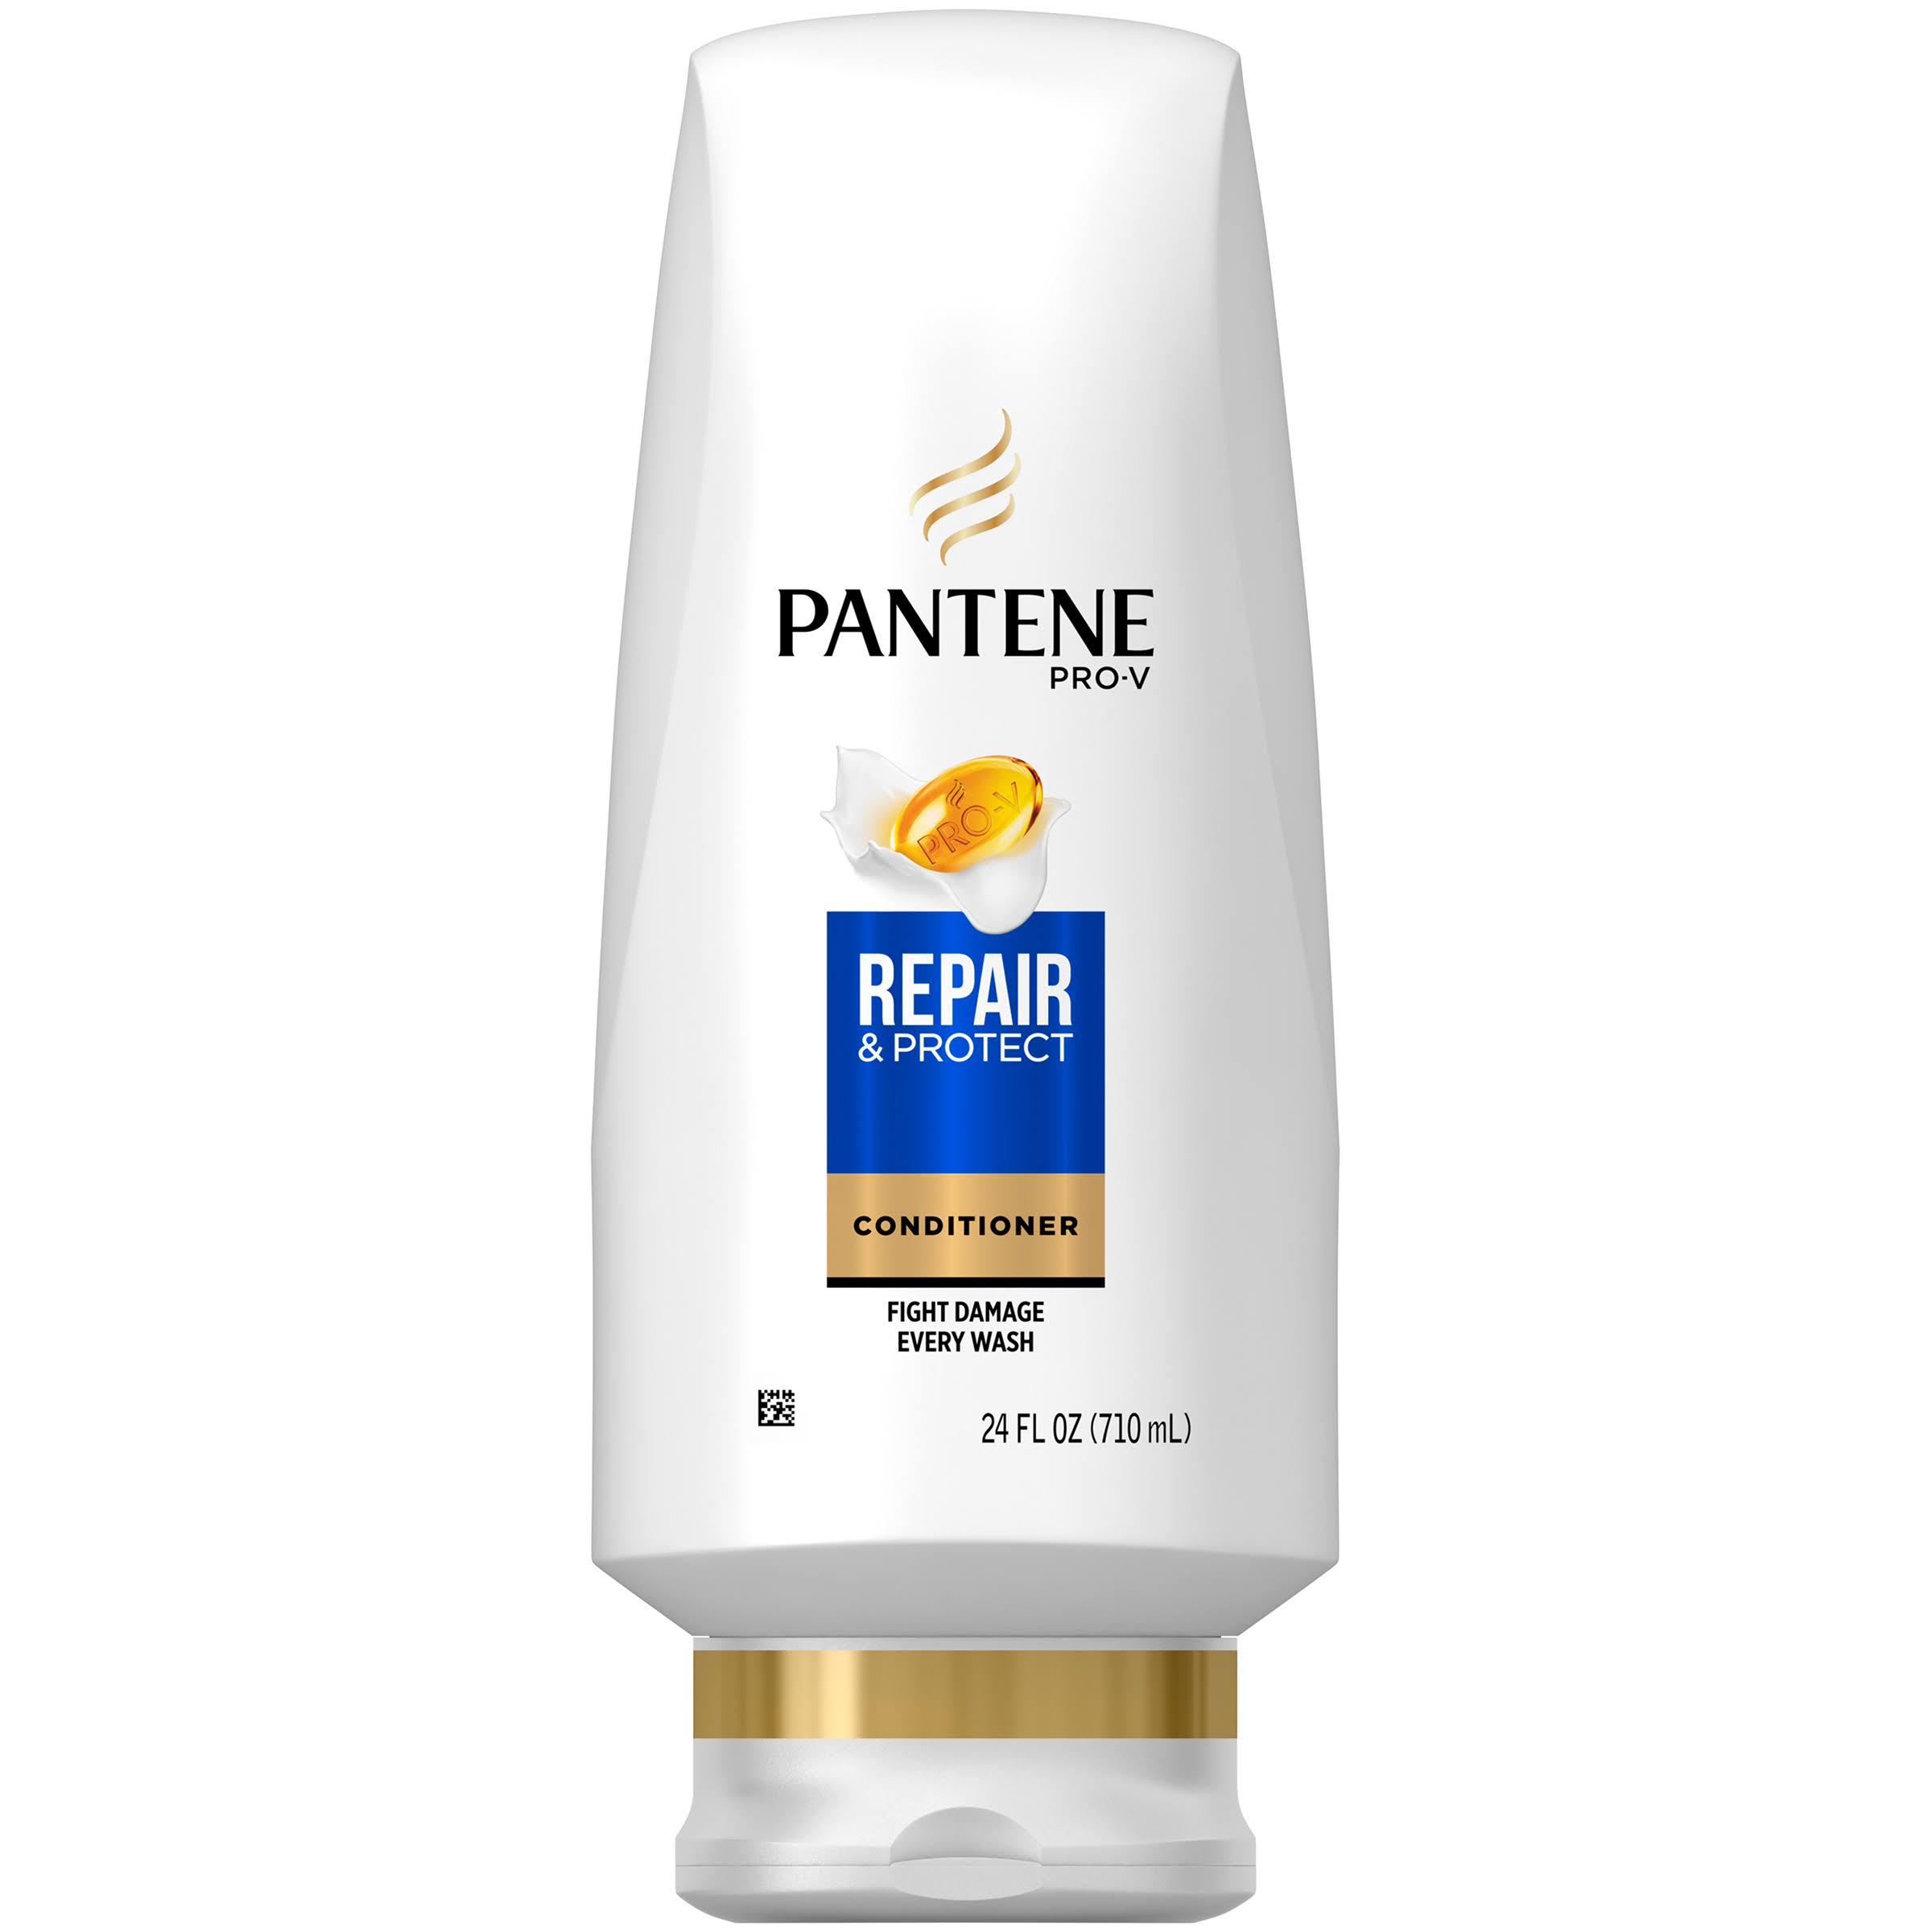 Pantene Pro-V Repair and Protect Conditioner - 24oz